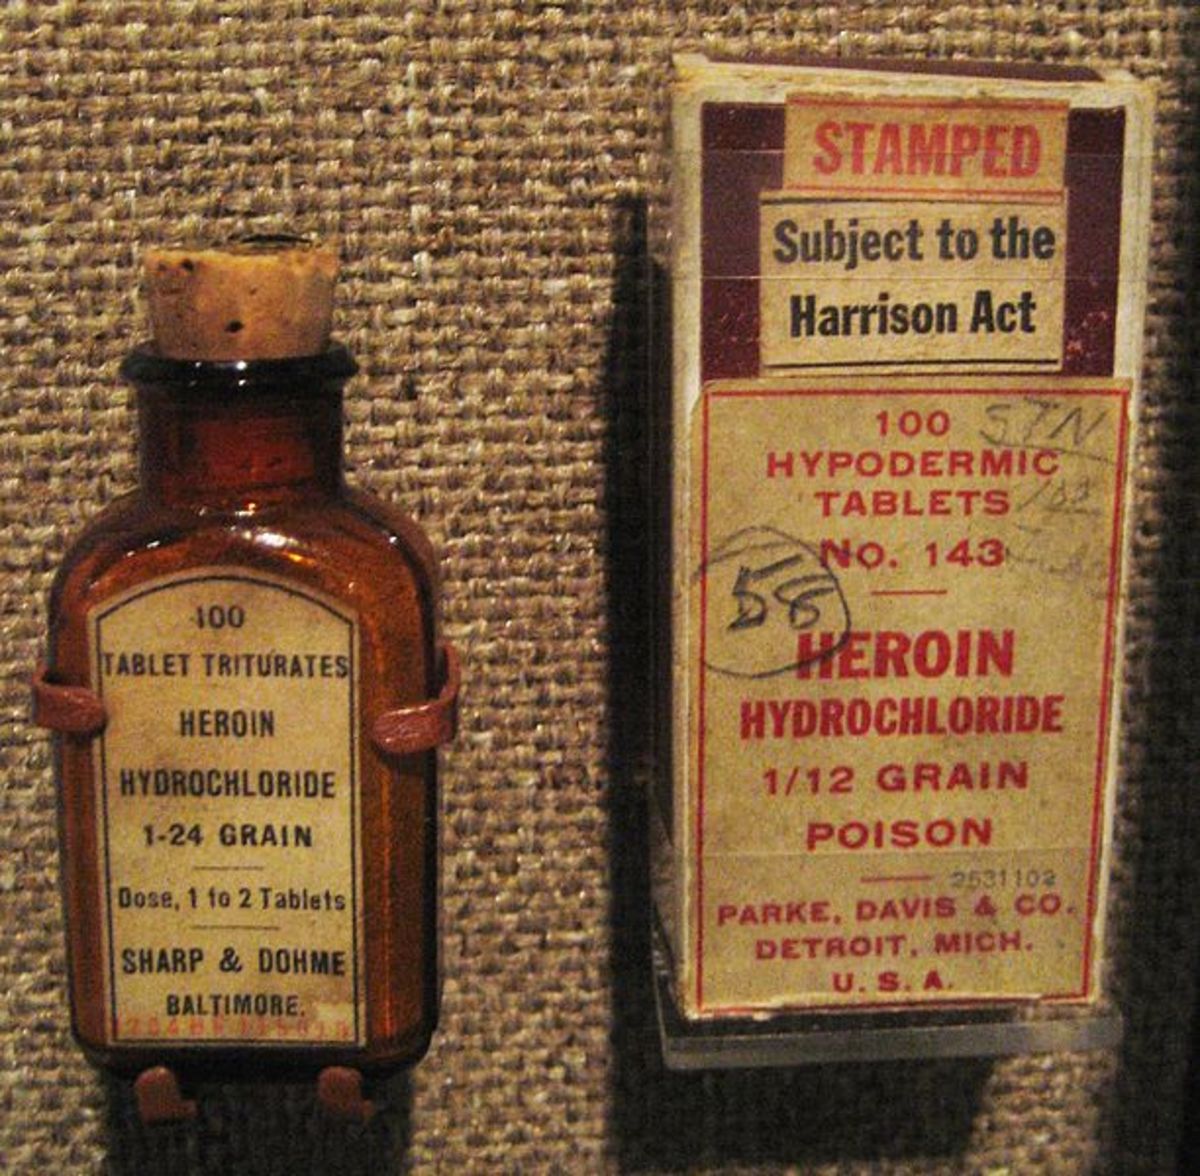 Commercially marketed Heroin containers from the early 20th century. Bottle on left; box on right. The box has a "Harrison Act" tax stamp, indicating a date of 1914 or shortly after. Photographed from display at the Old Mint Museum, New Orleans.